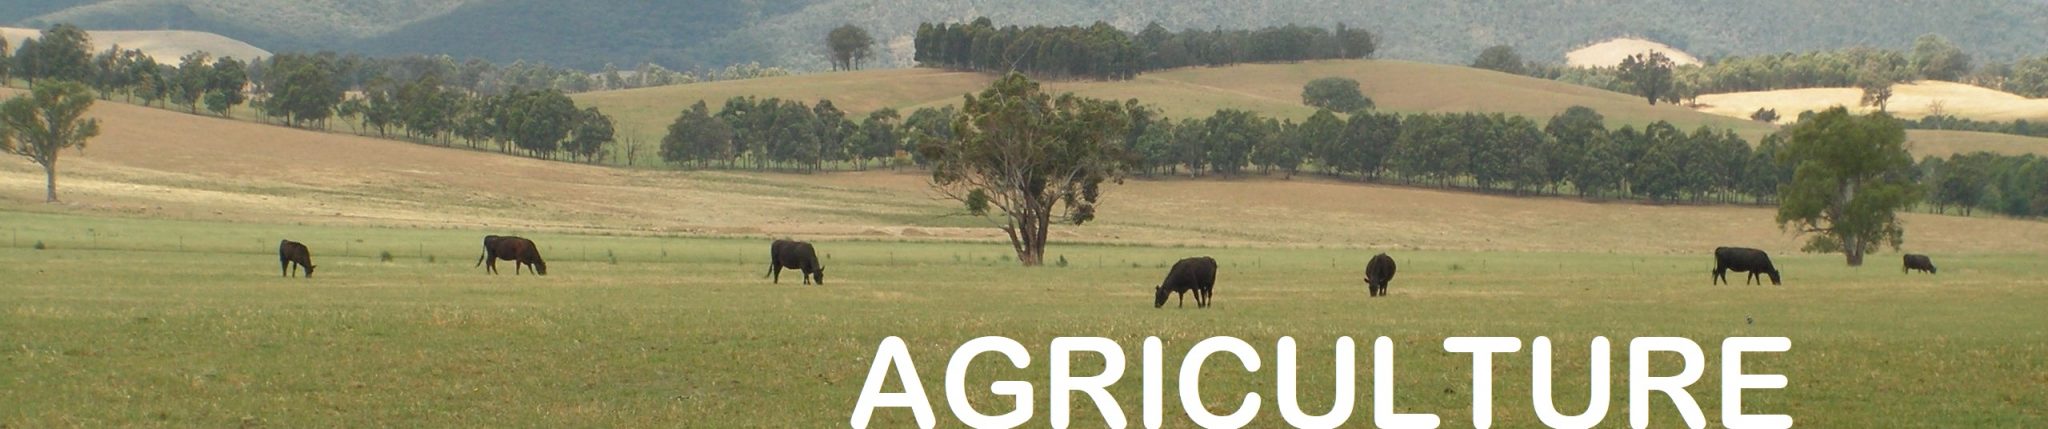 Agriculture Banner Image